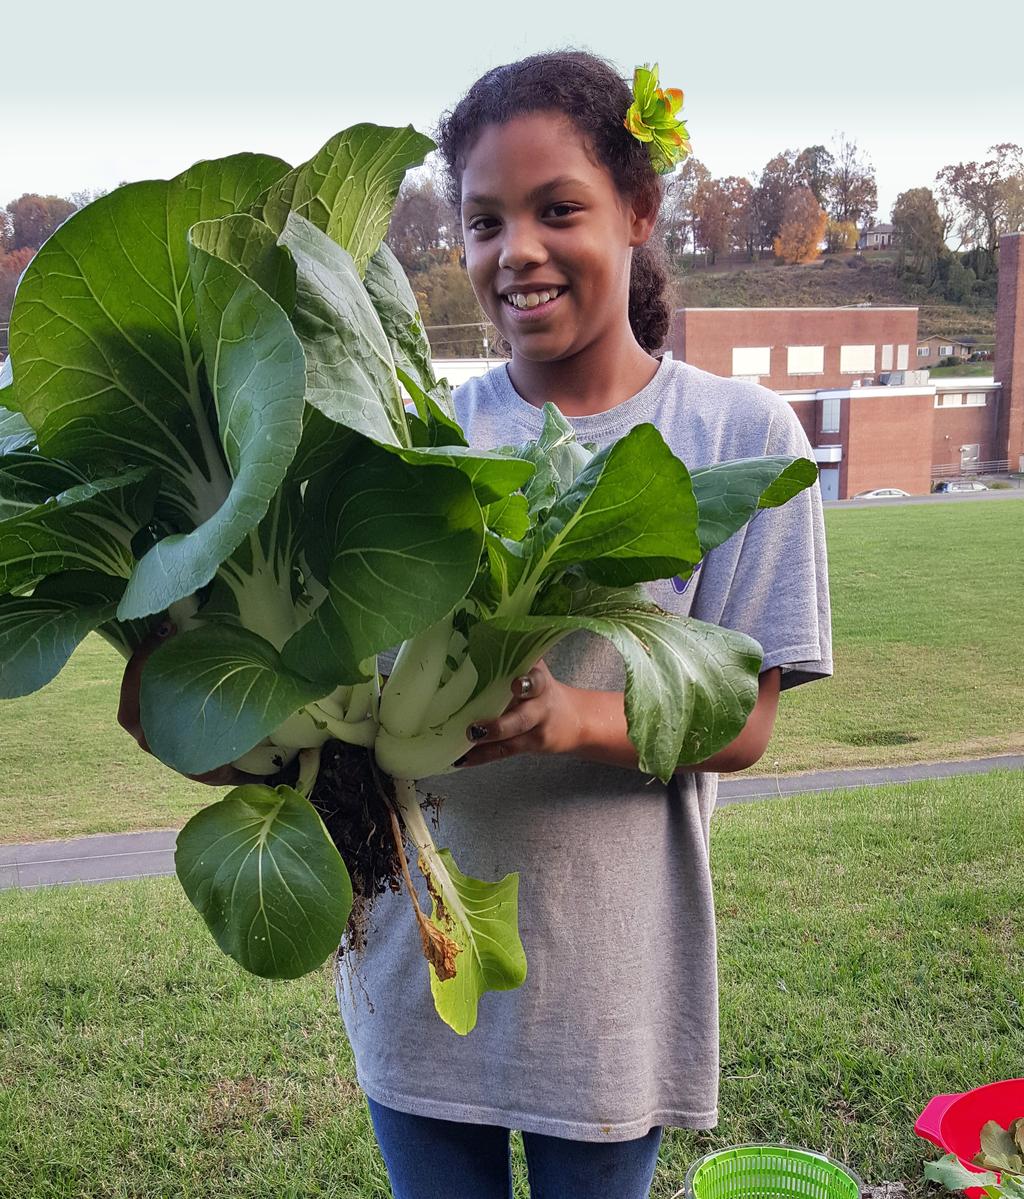 W 362-D YOUTH GARDENING IN TENNESSEE: TEN FAVORITE PLANTS FOR YOUTH GARDENERS IN